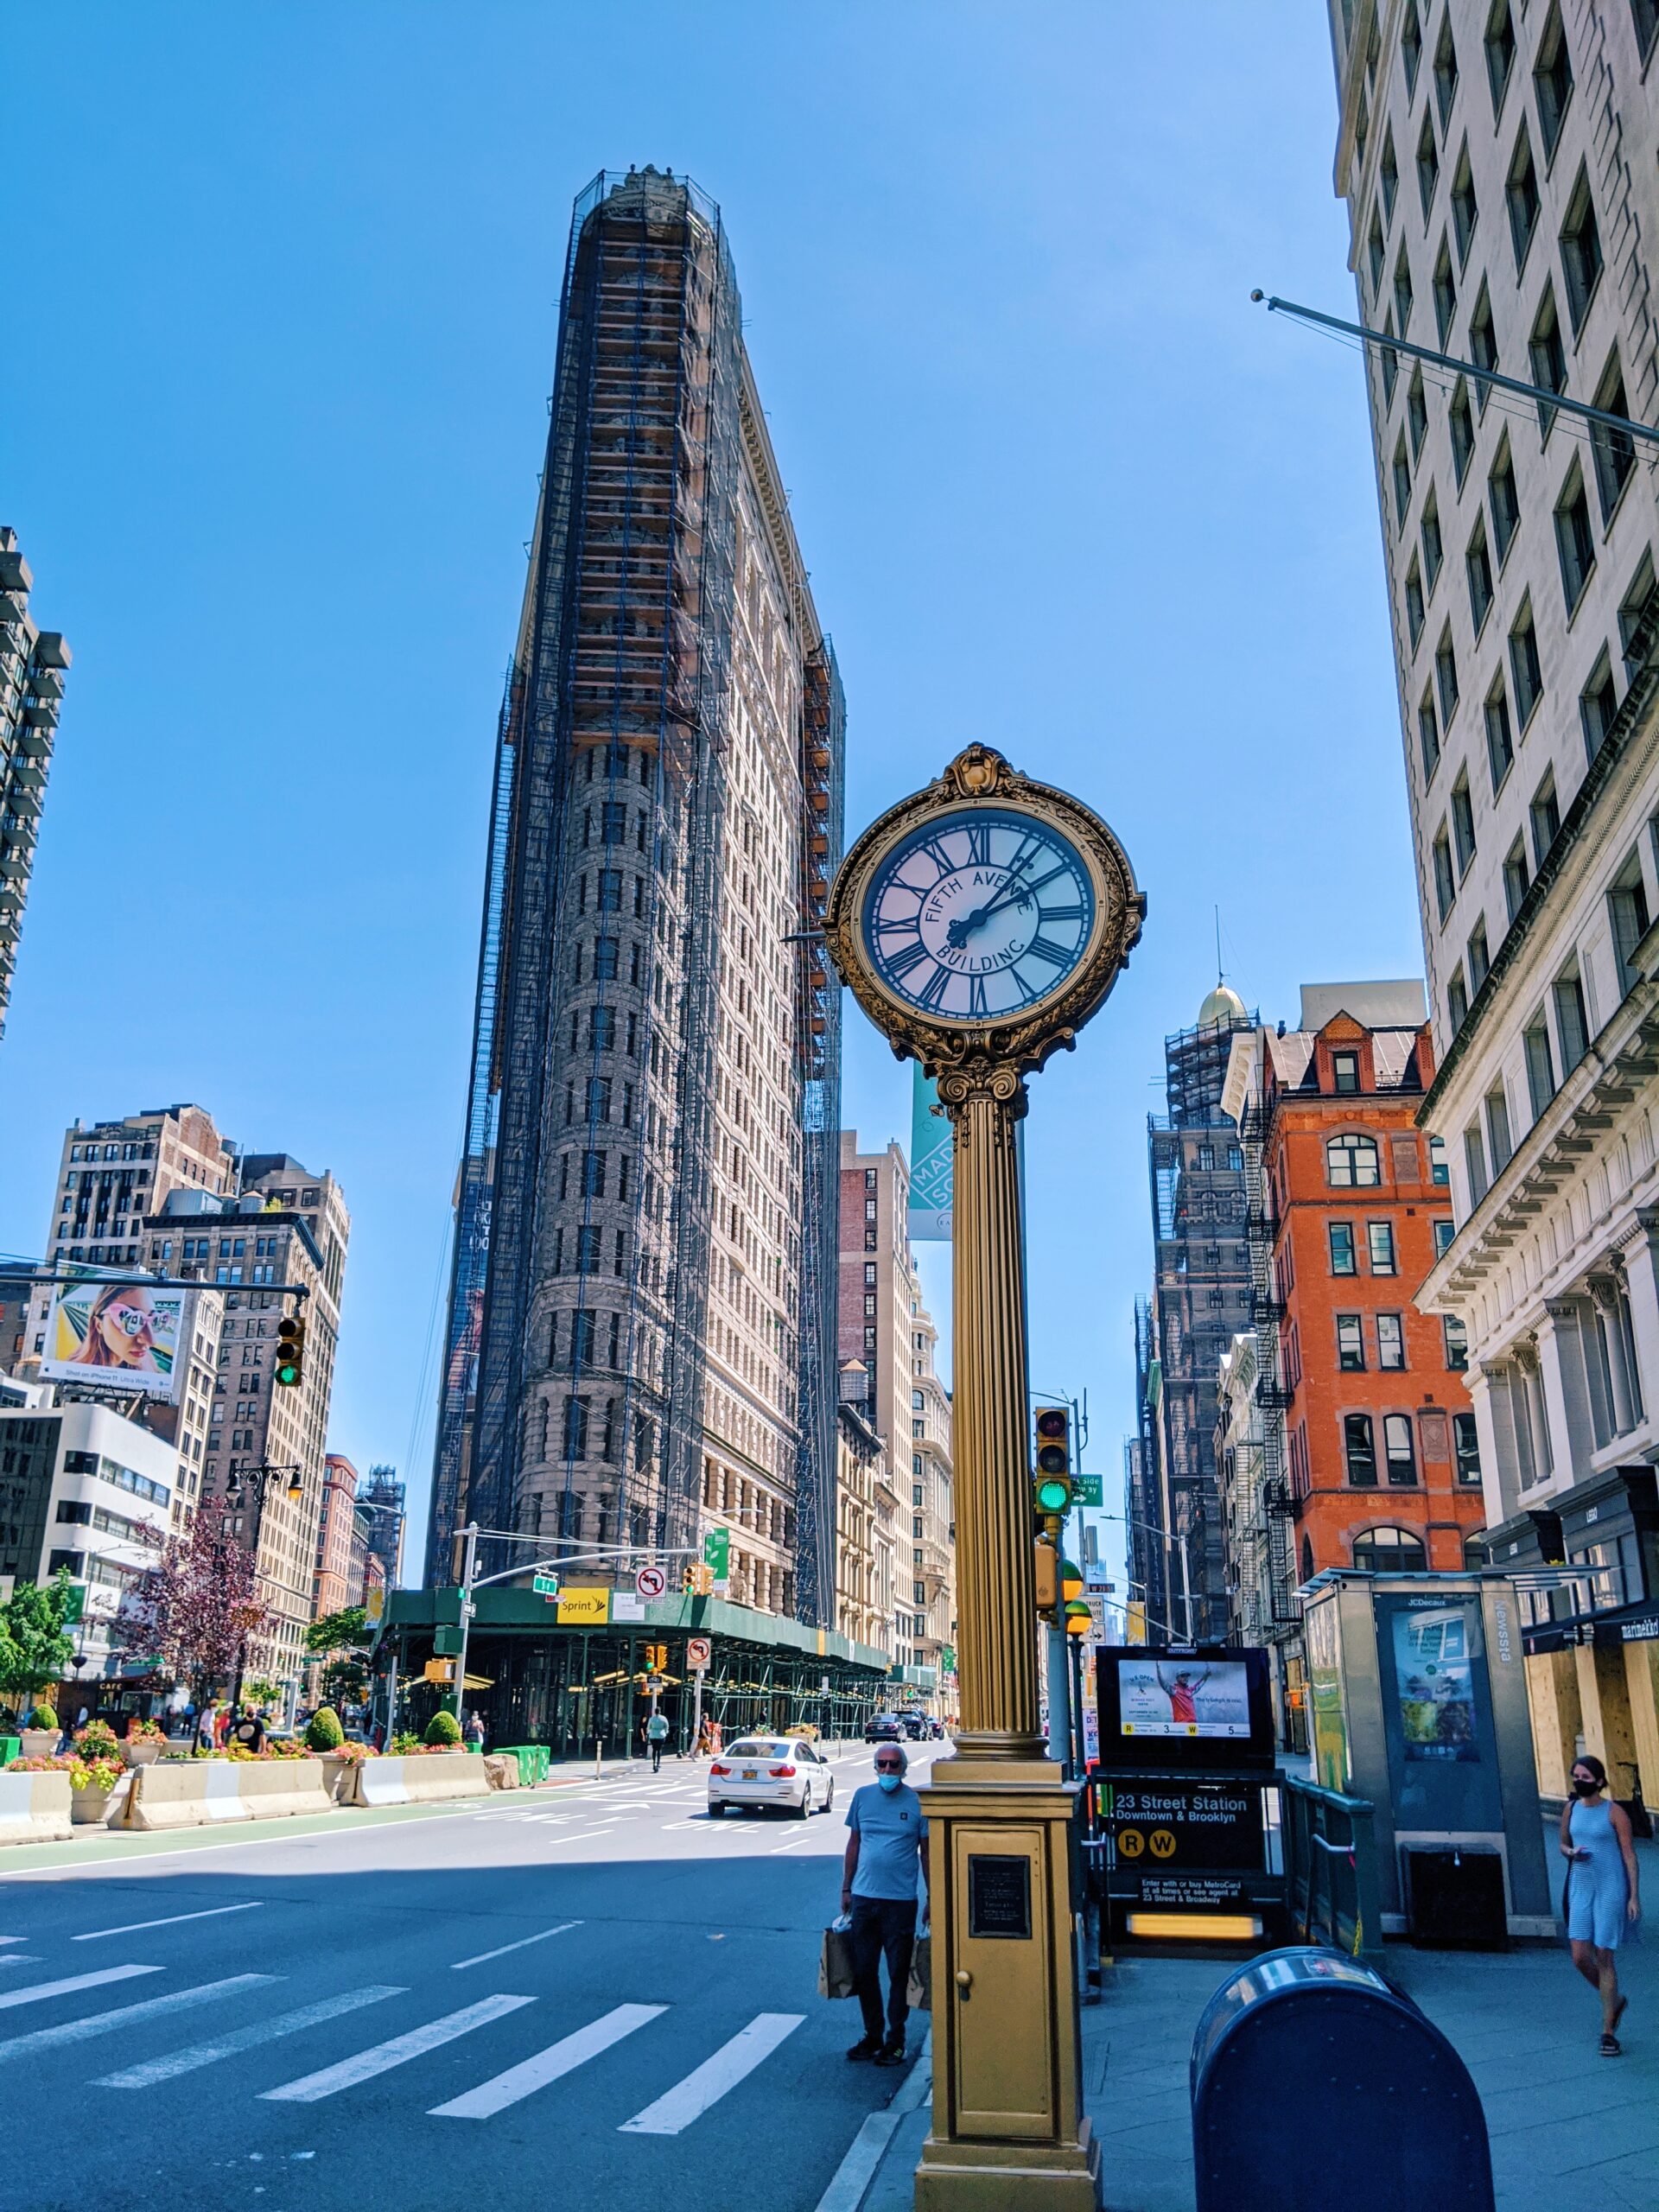 flatiron building with the clock